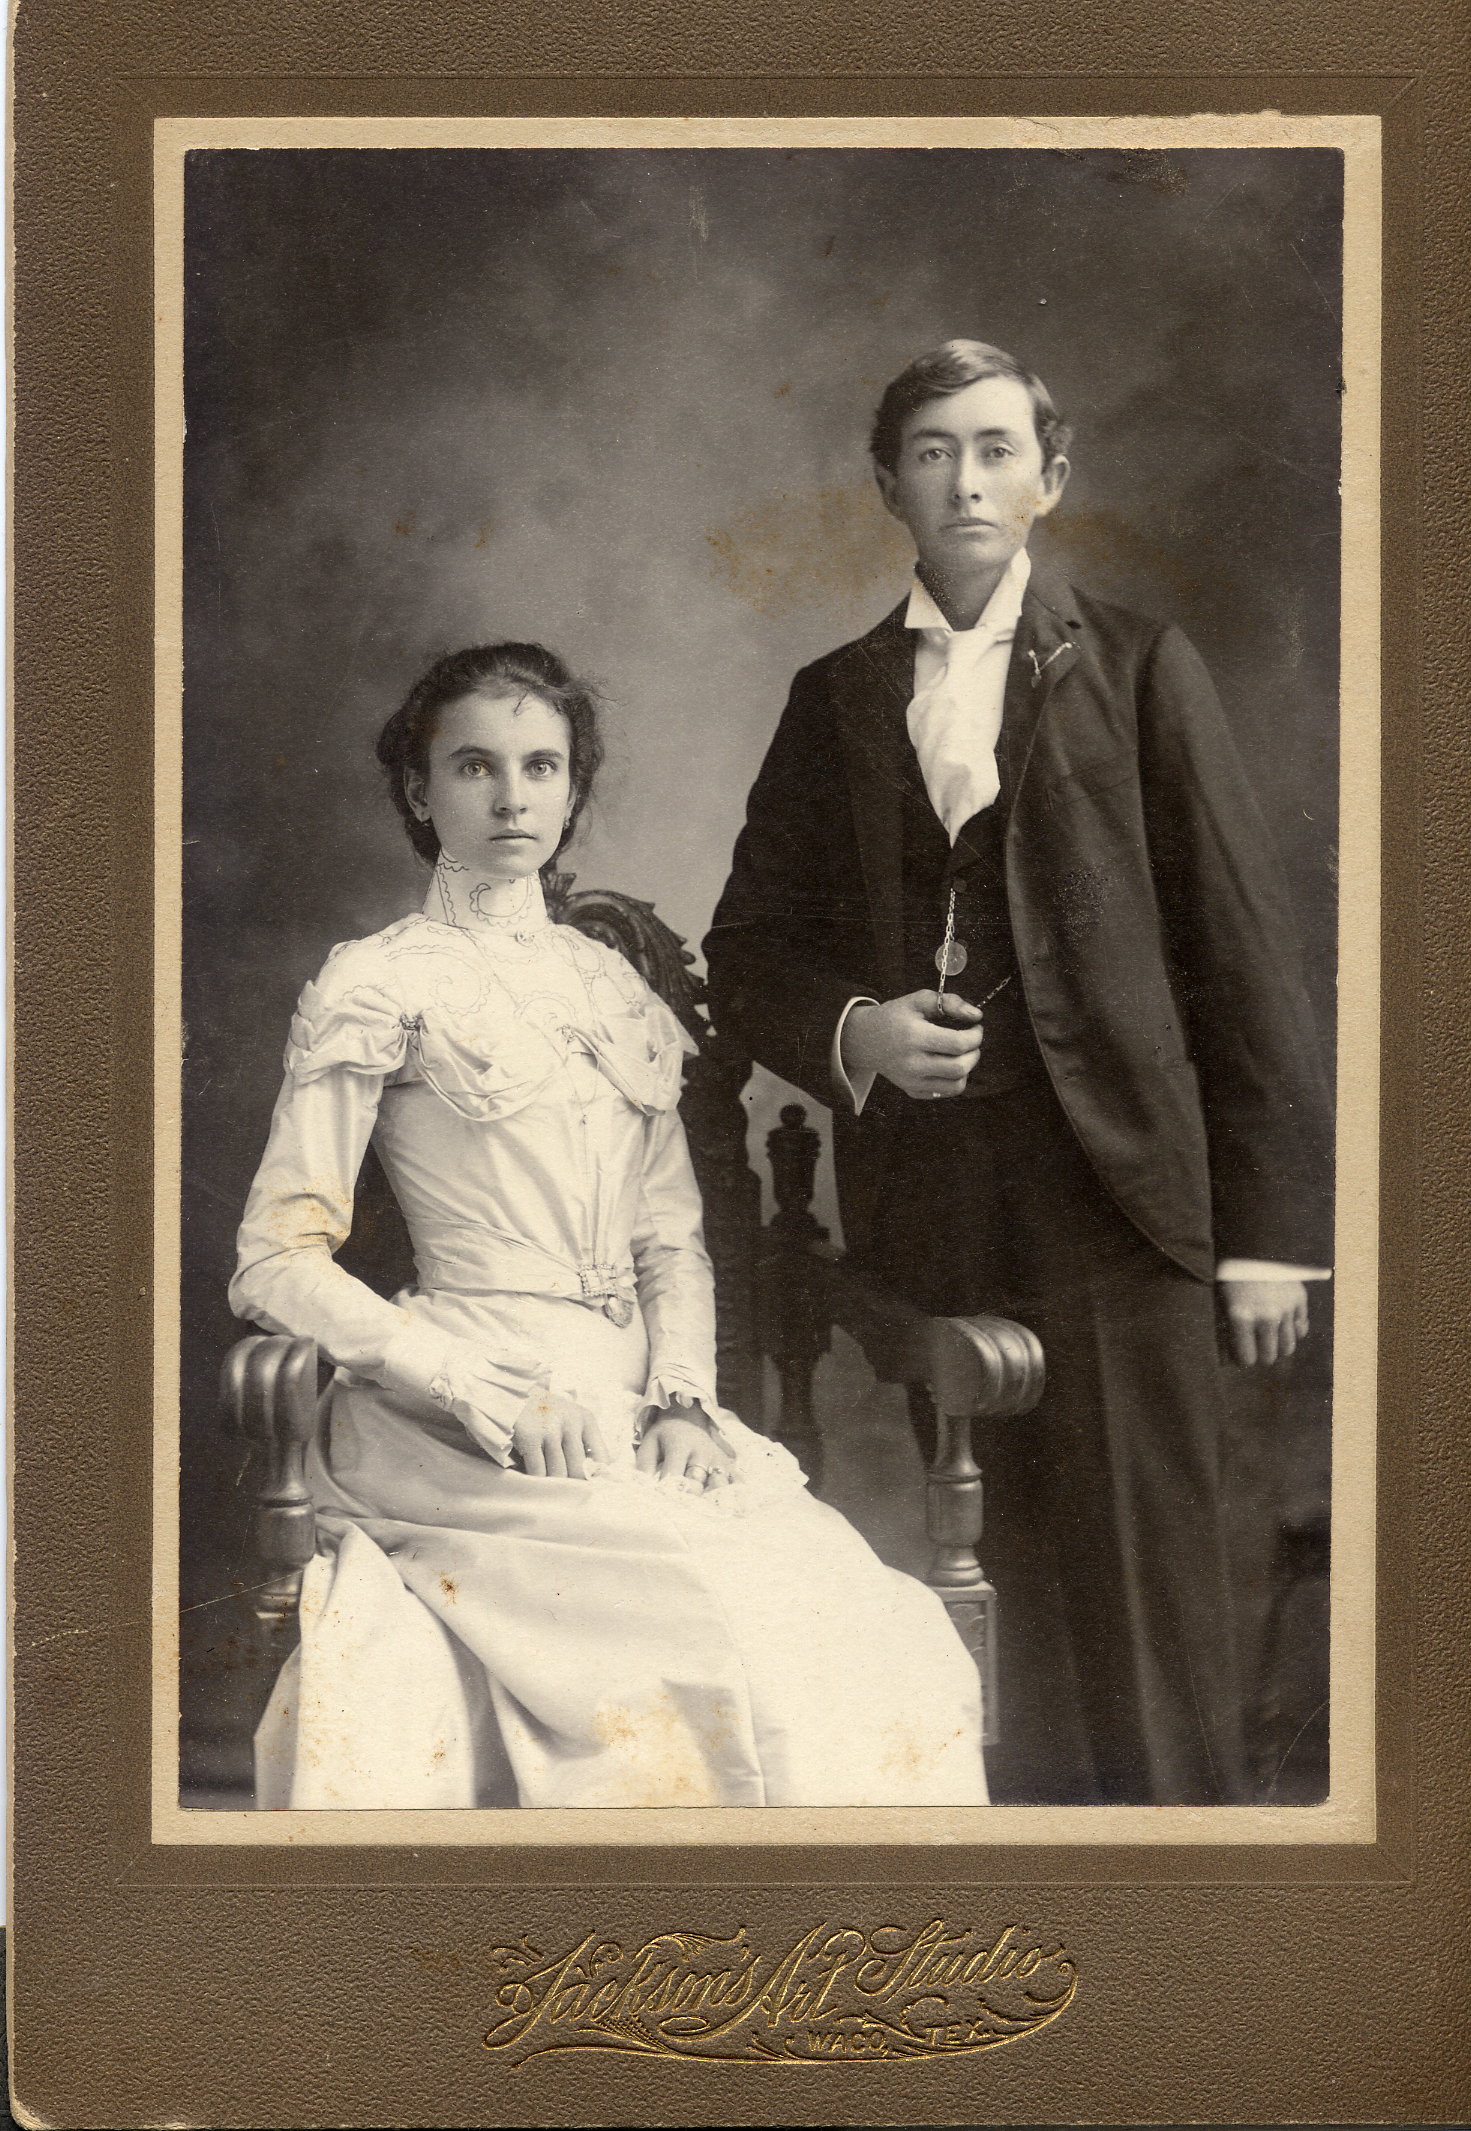 Mr & Mrs James Granville Stovall (nee Loretta Roan Wayland), who were married at Christmas time, 1899.  They lived in Limestone County, Texas but went to Waco, to Jackson Studio, to record their newly married state and some obvious prosperity. This is another portrait taken at the same time as the more traditional pose of the gentleman seated and the lady standing.  They are my maternal grandparents. 